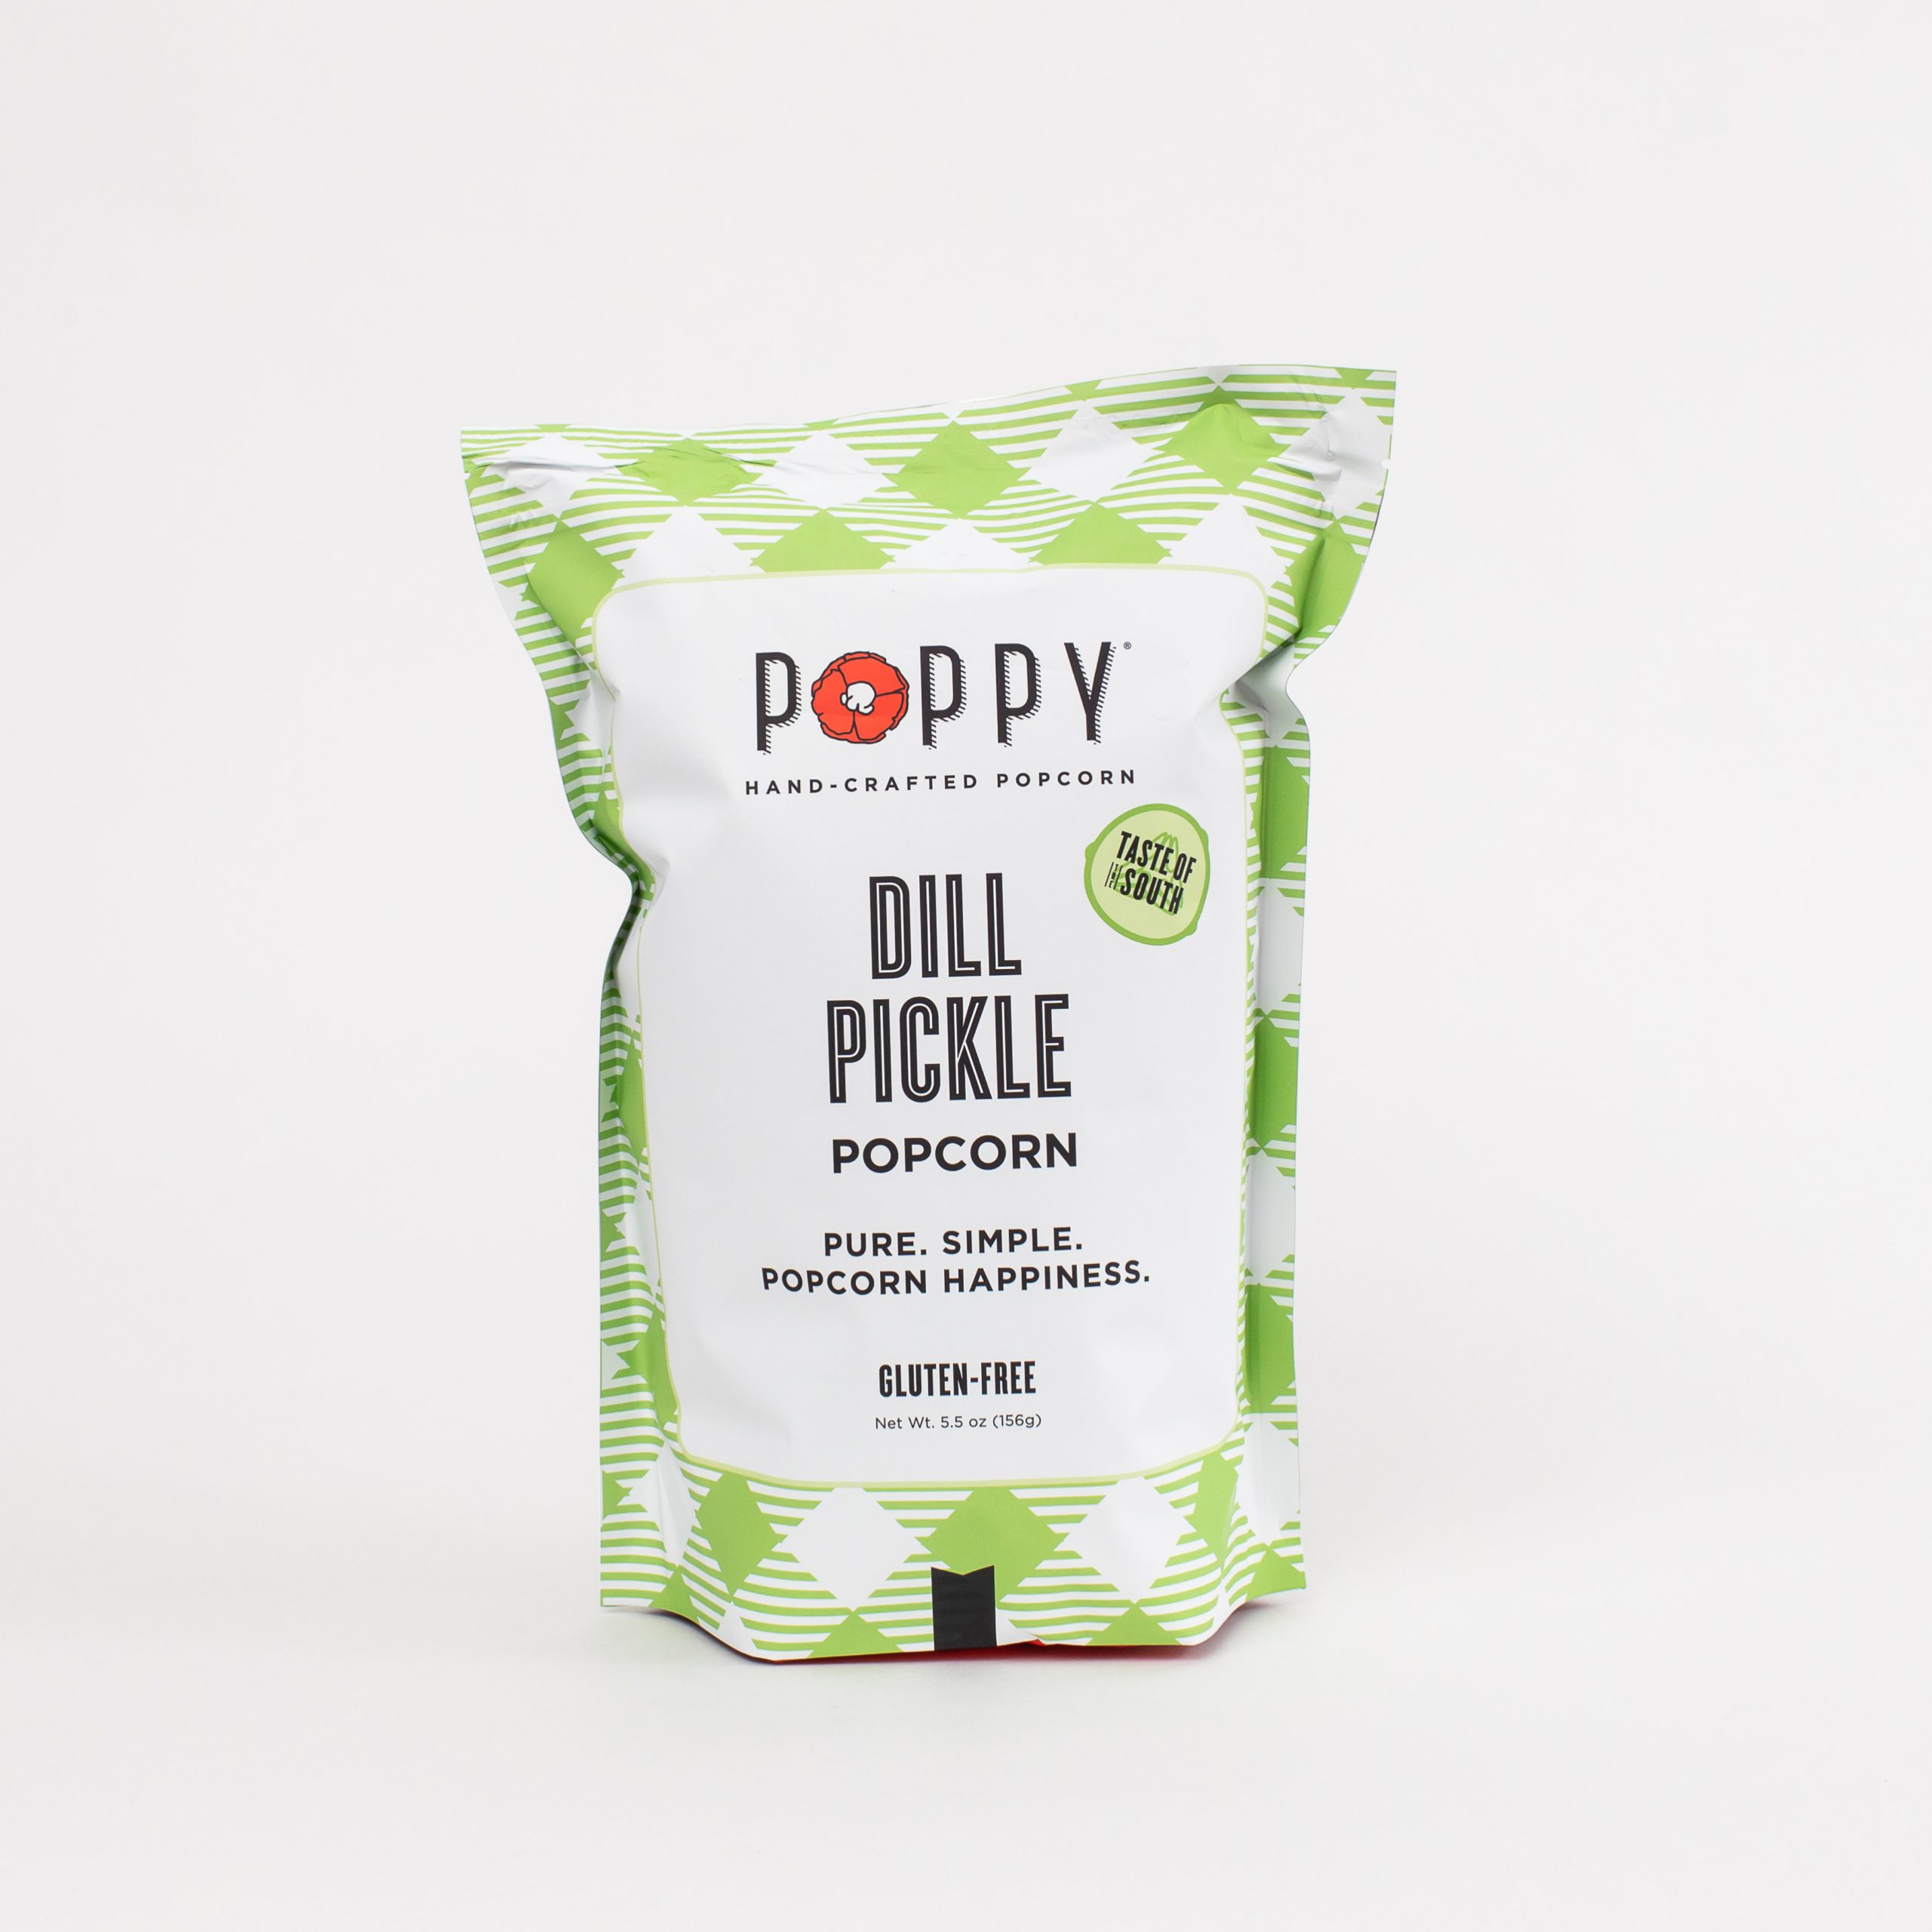 Find Out What Cocktail To Pair With Gourmet Dill Pickle Popcorn